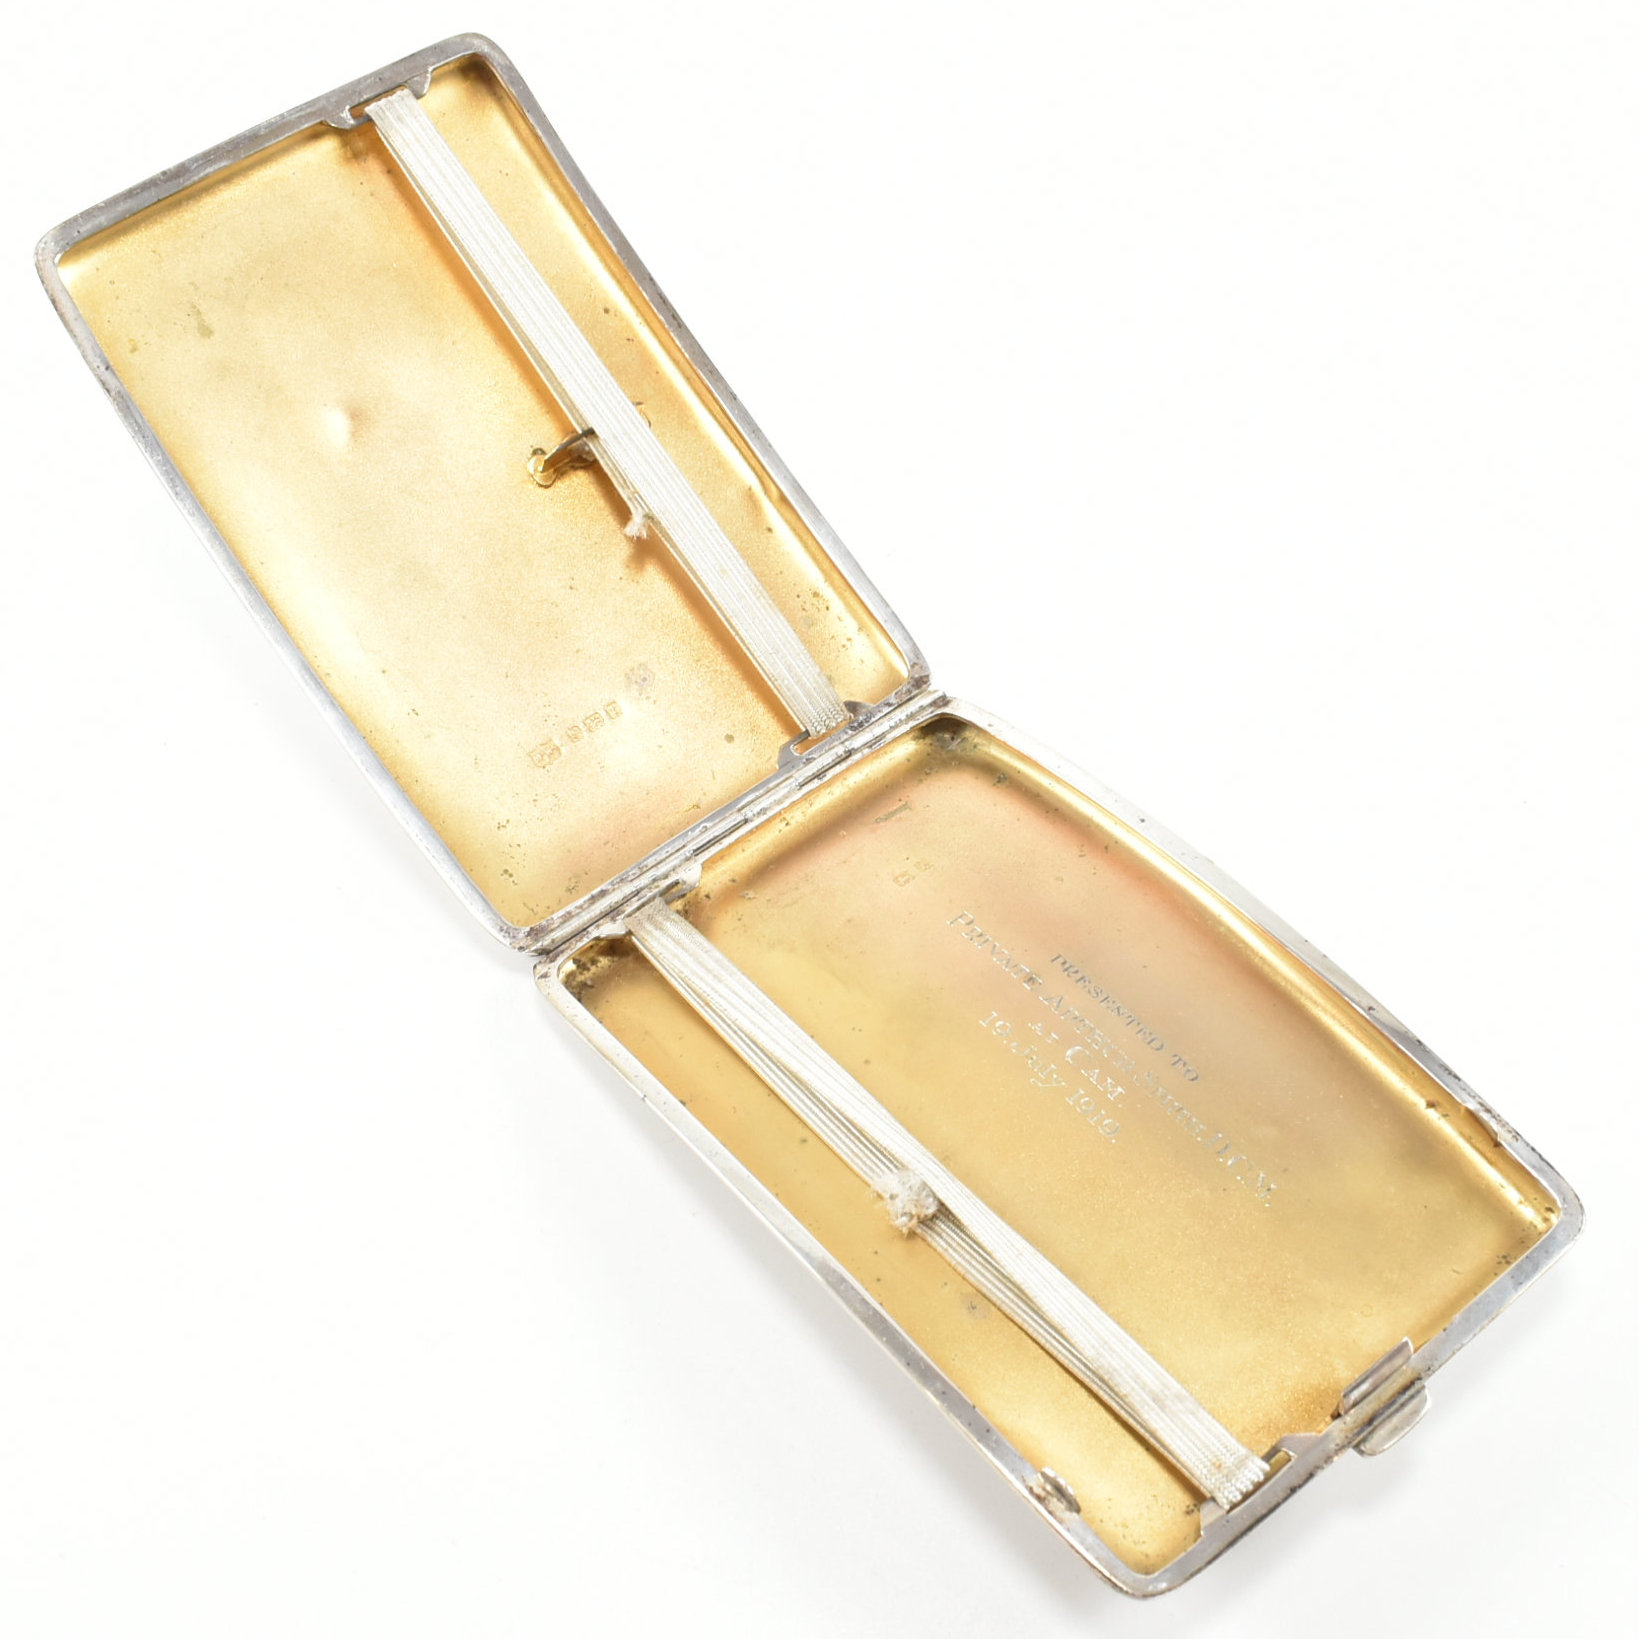 EARLY 20TH CENTURY HALLMARKED SILVER MAPPIN & WEBB CIGARETTE CASE - Image 4 of 8